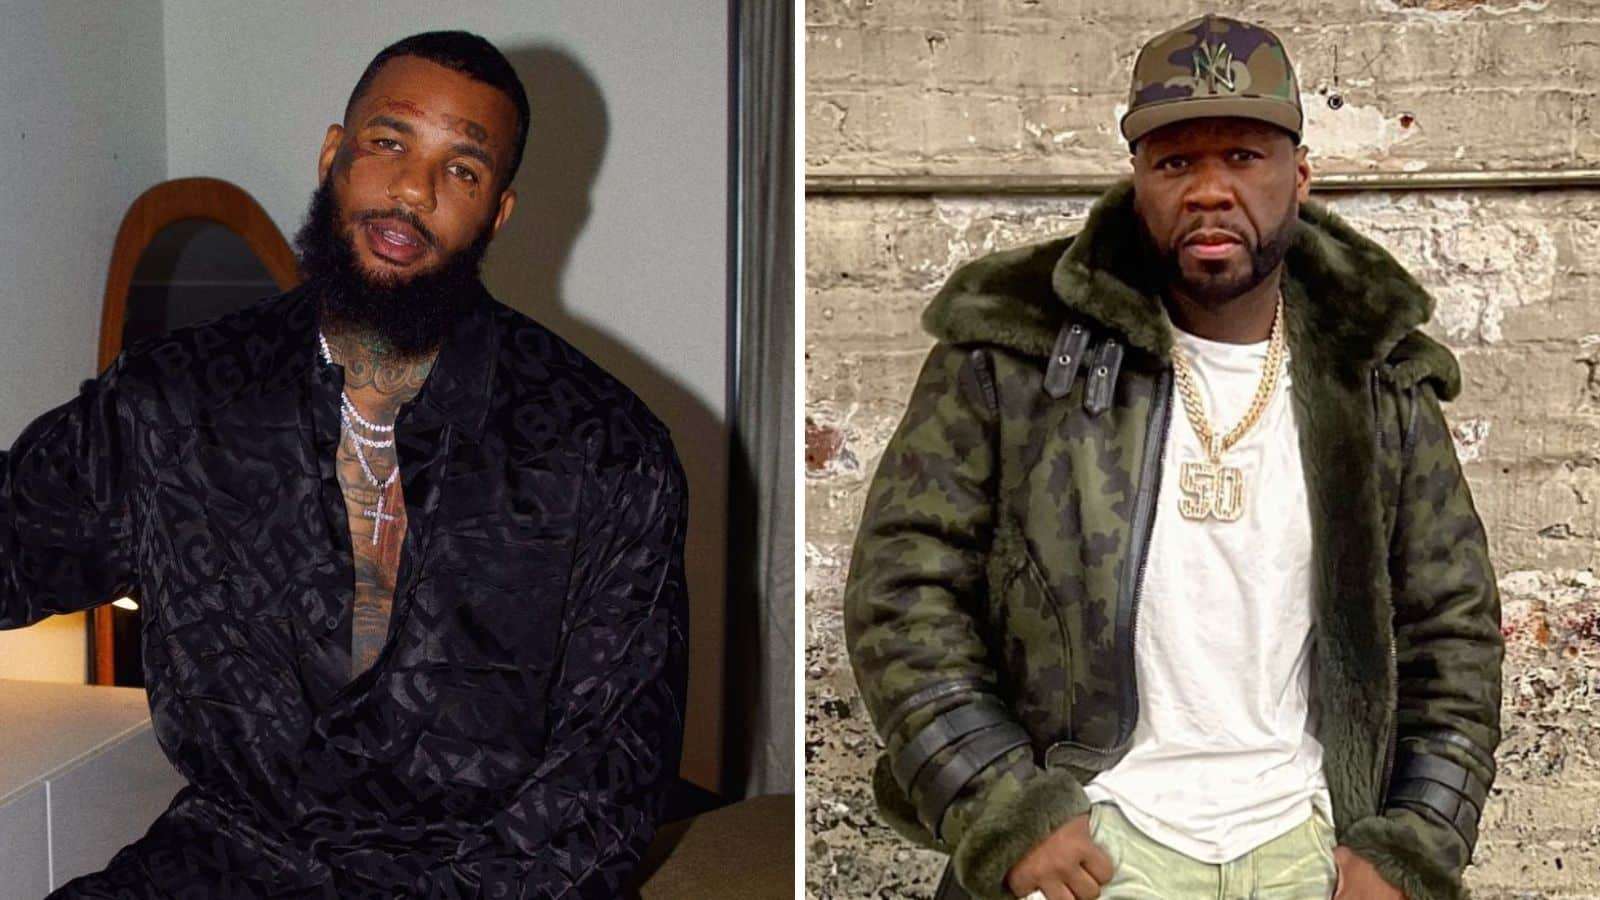 The Game and 50 Cent